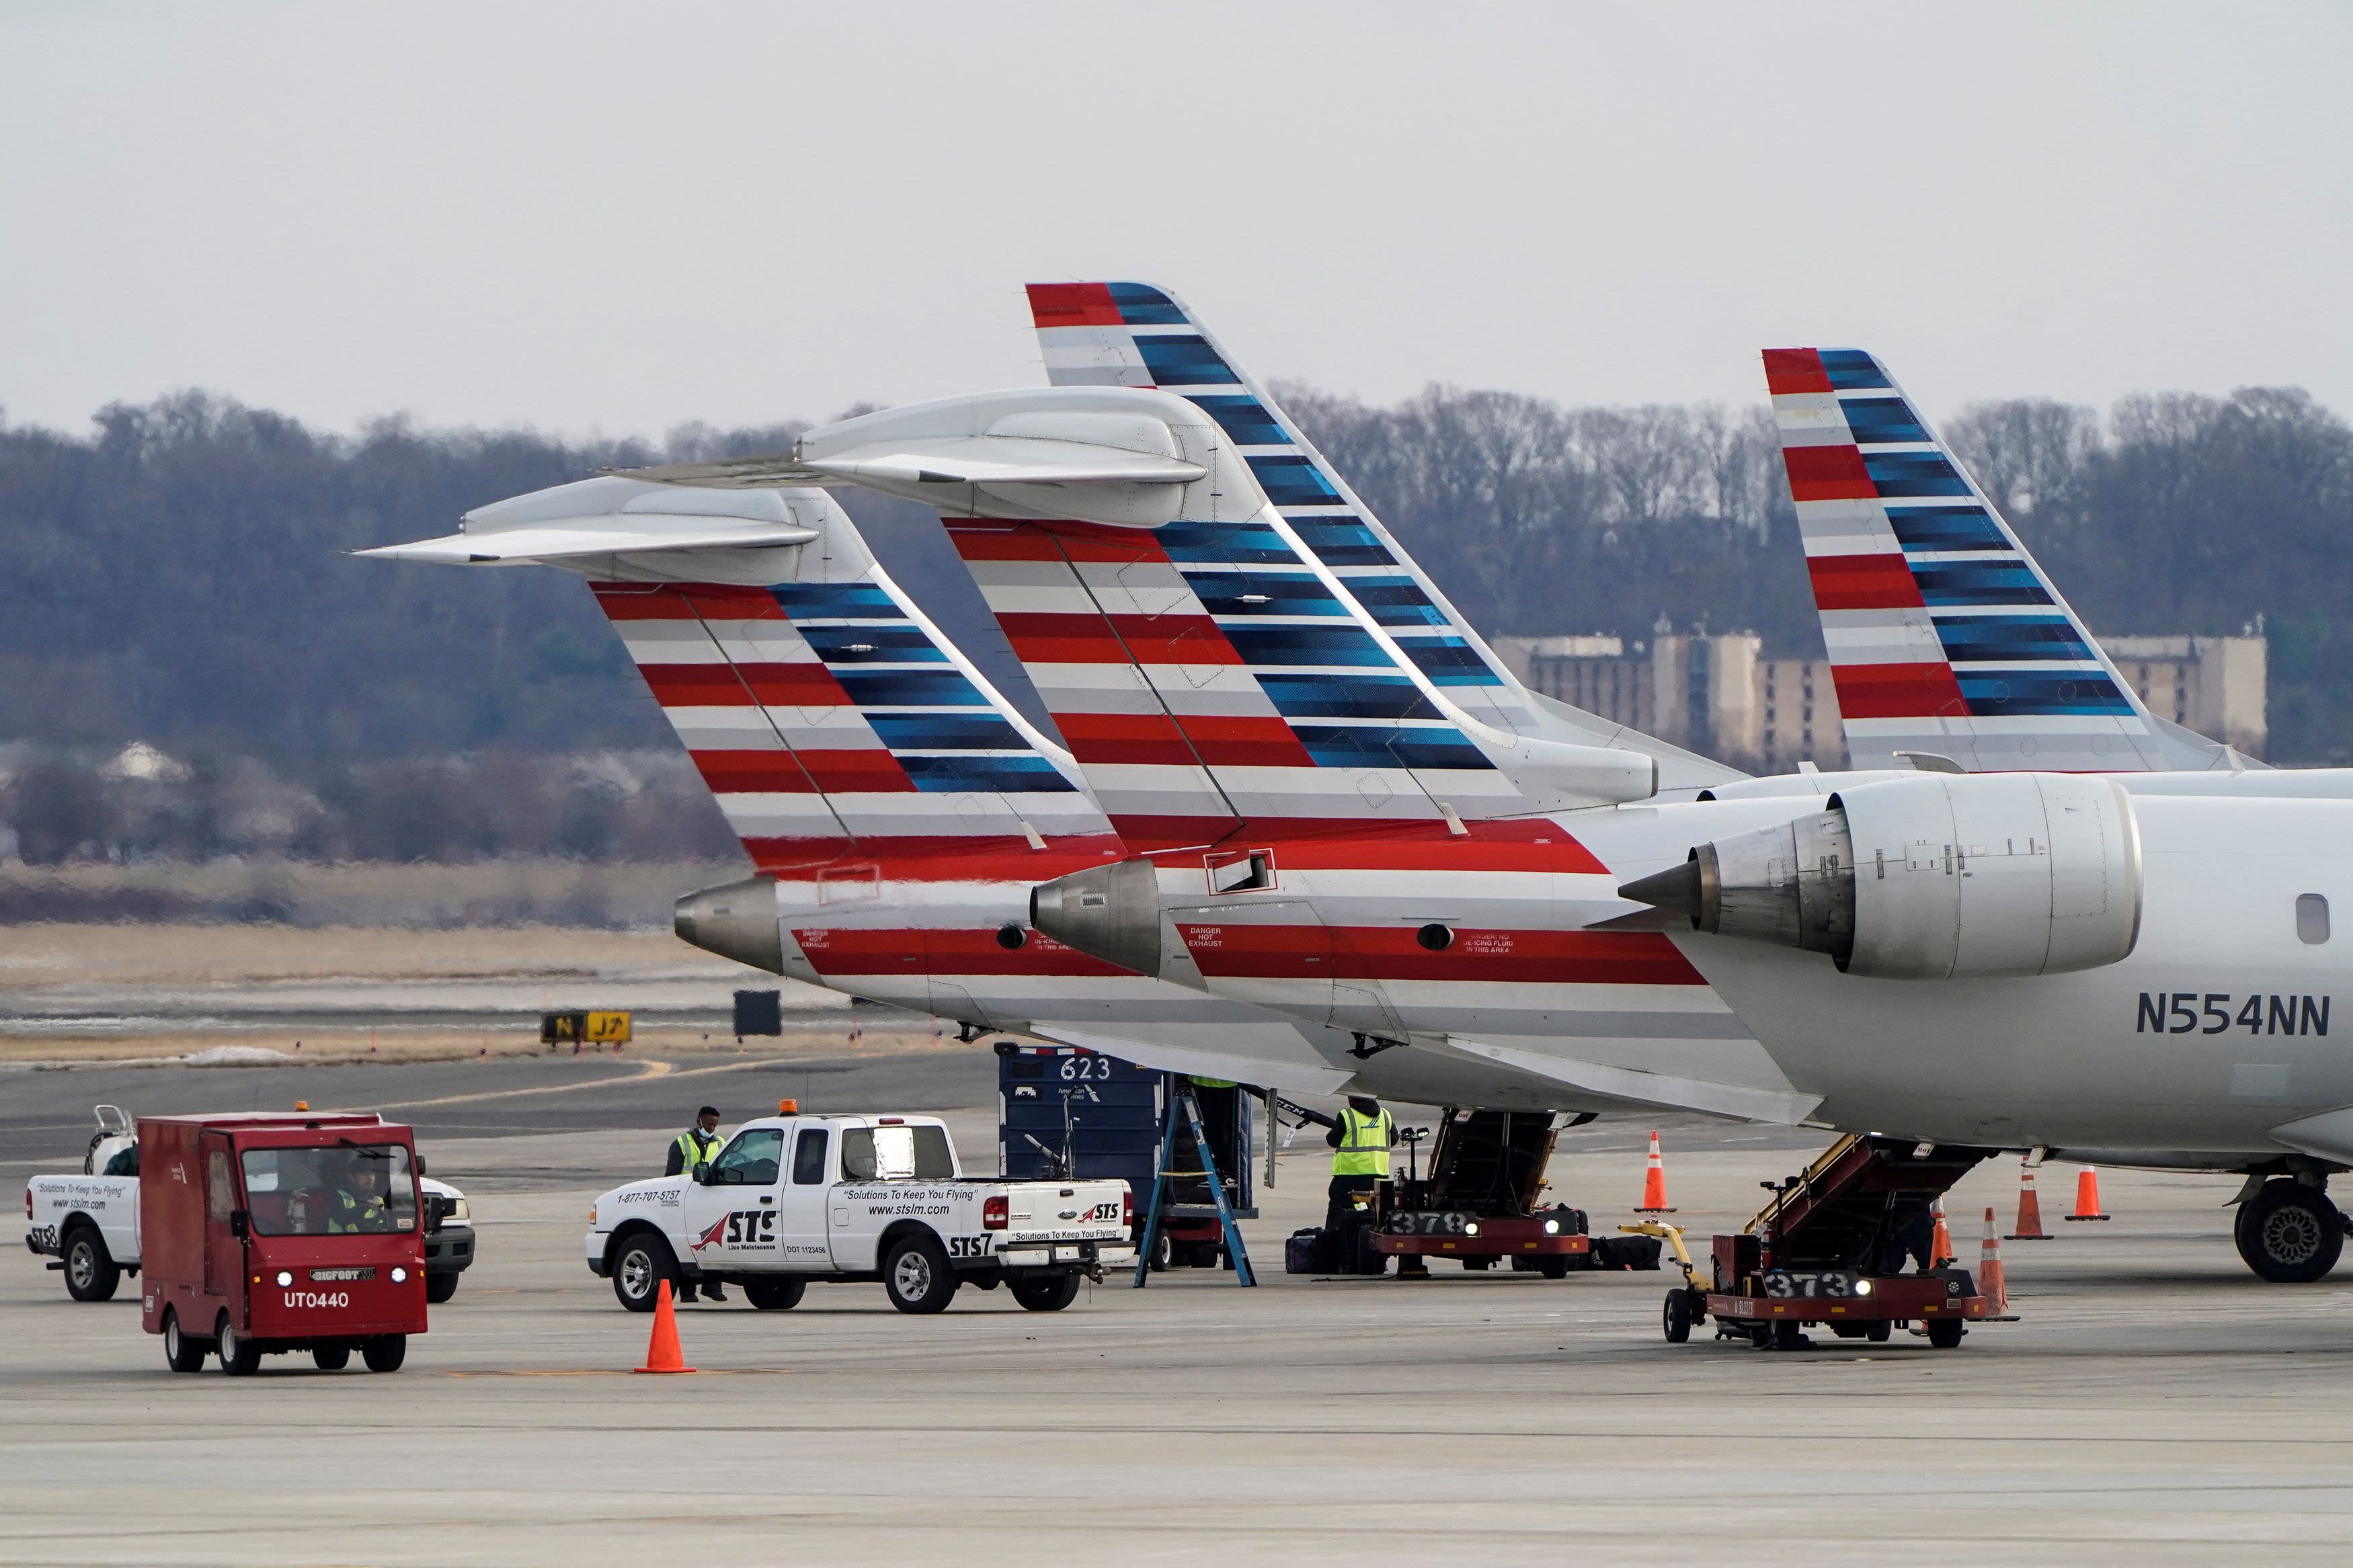 American Airlines fires lawyers after blaming child for being filmed in bathroom